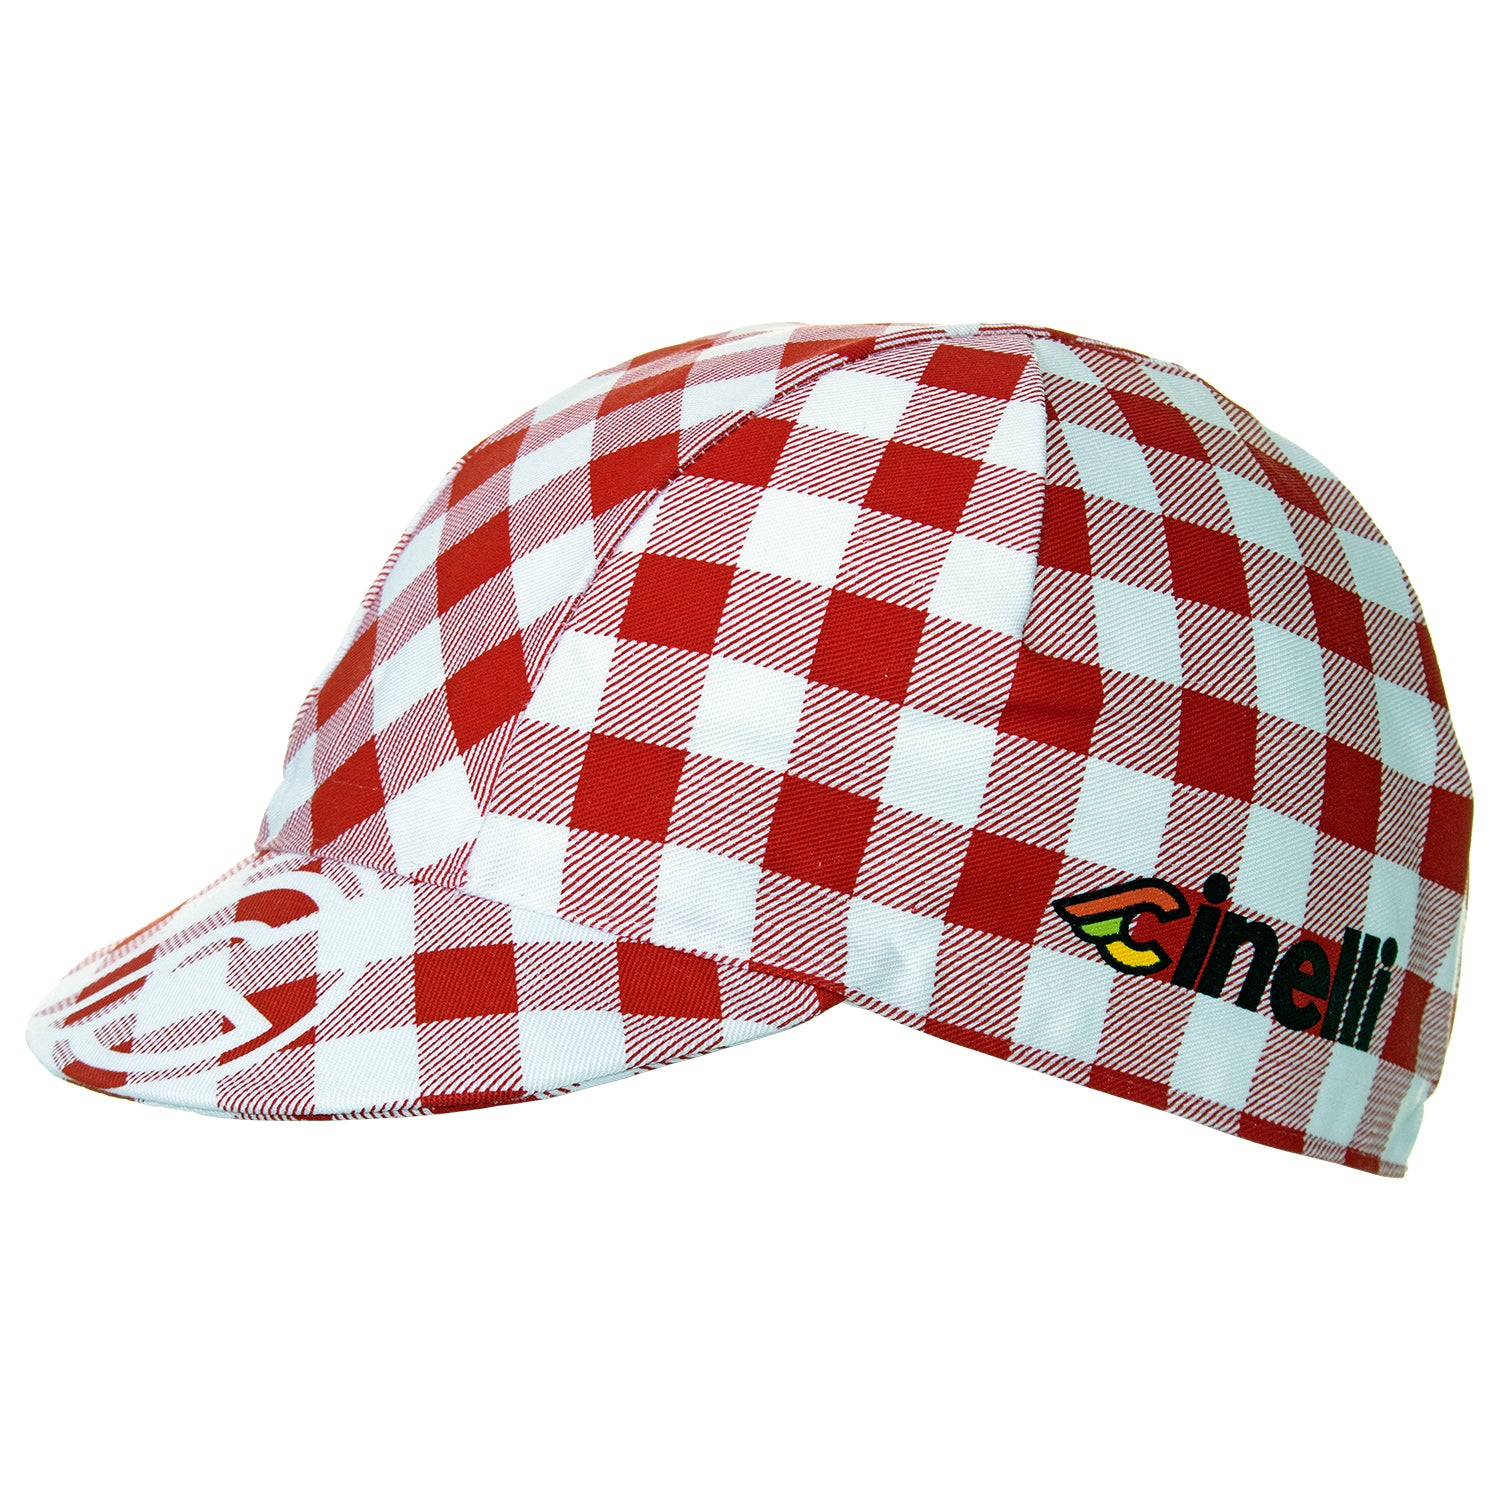 Side view of the Cinelli Ciao Italia Cotton Cycling Cap.  A white Winged C logo is printed on the peak with Cinelli printed in colour on each side.